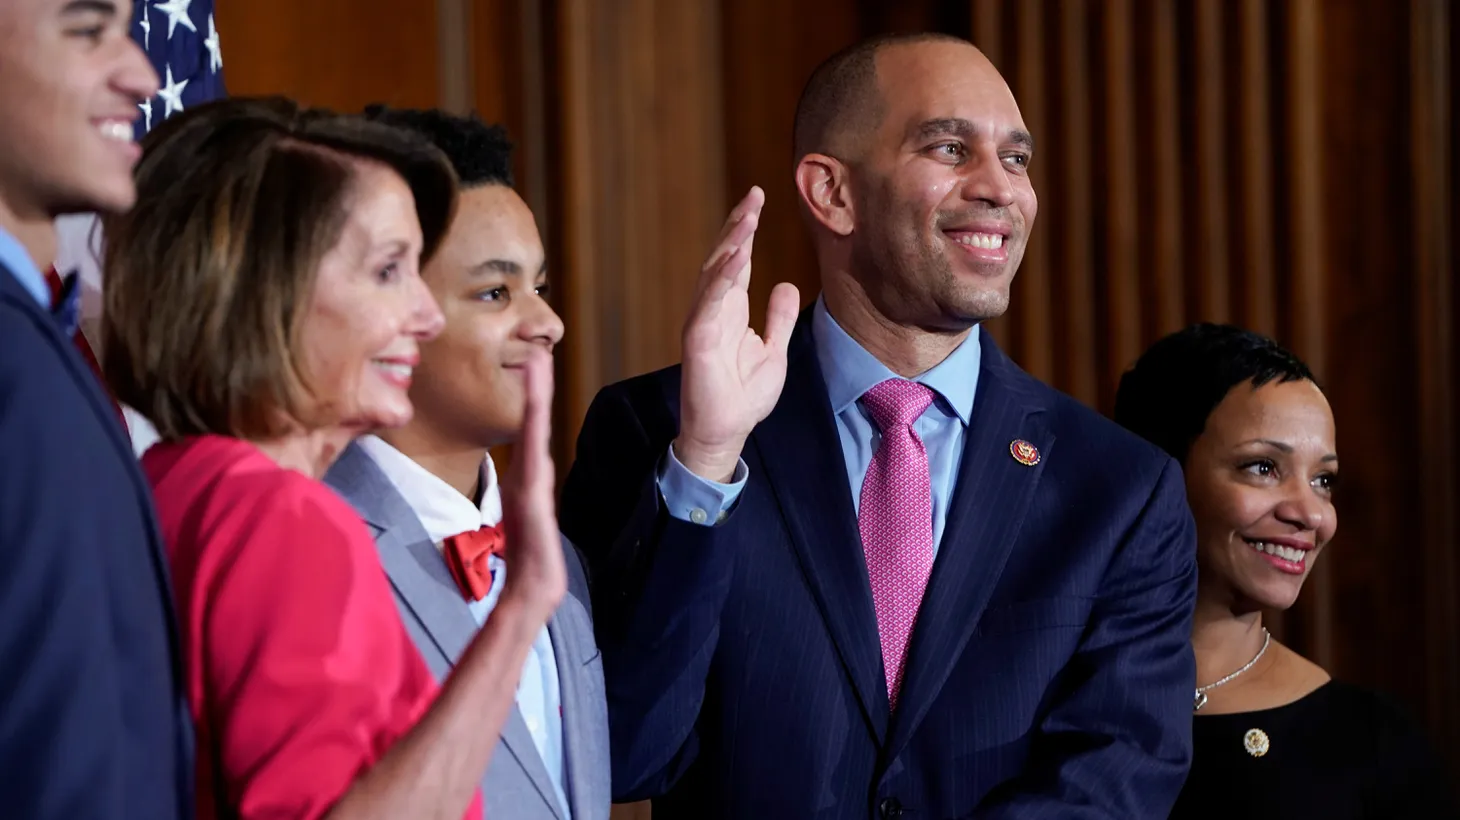 Rep. Hakeem Jeffries (D-NY) poses with Speaker of the House Nancy Pelosi (D-CA) for a ceremonial swearing-in picture on Capitol Hill in Washington, U.S., January 3, 2019.